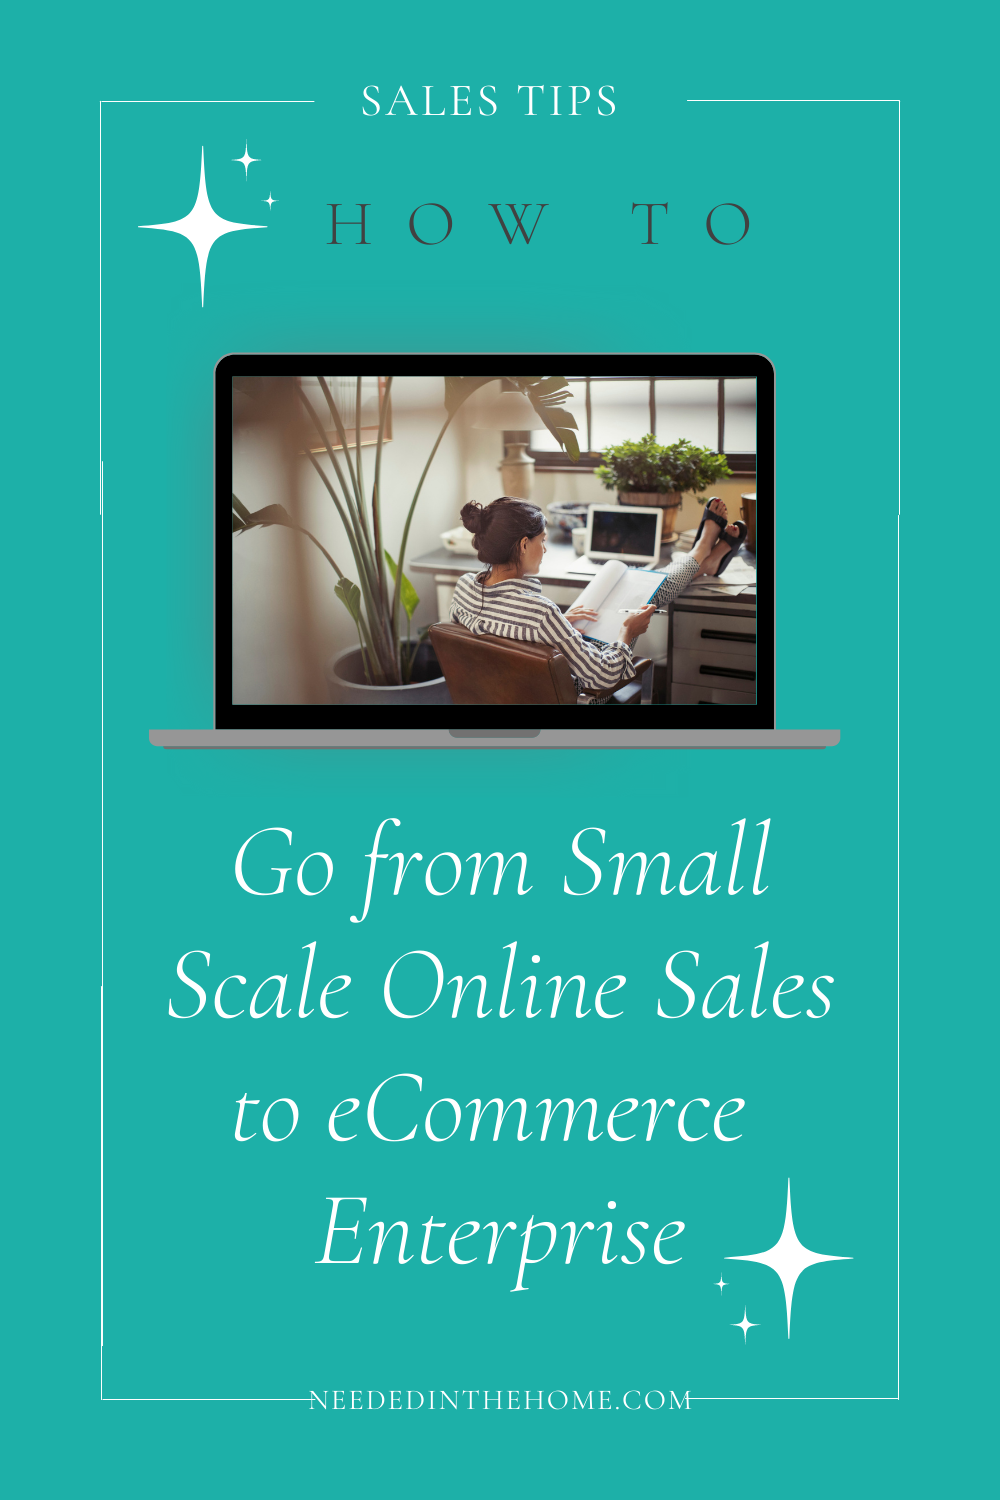 pinterest-pin-description sales tips how to go from small scale online sales to ecommerce enterprise neededinthehome image of monitor with woman relaxed with feet on desk looking at her sales